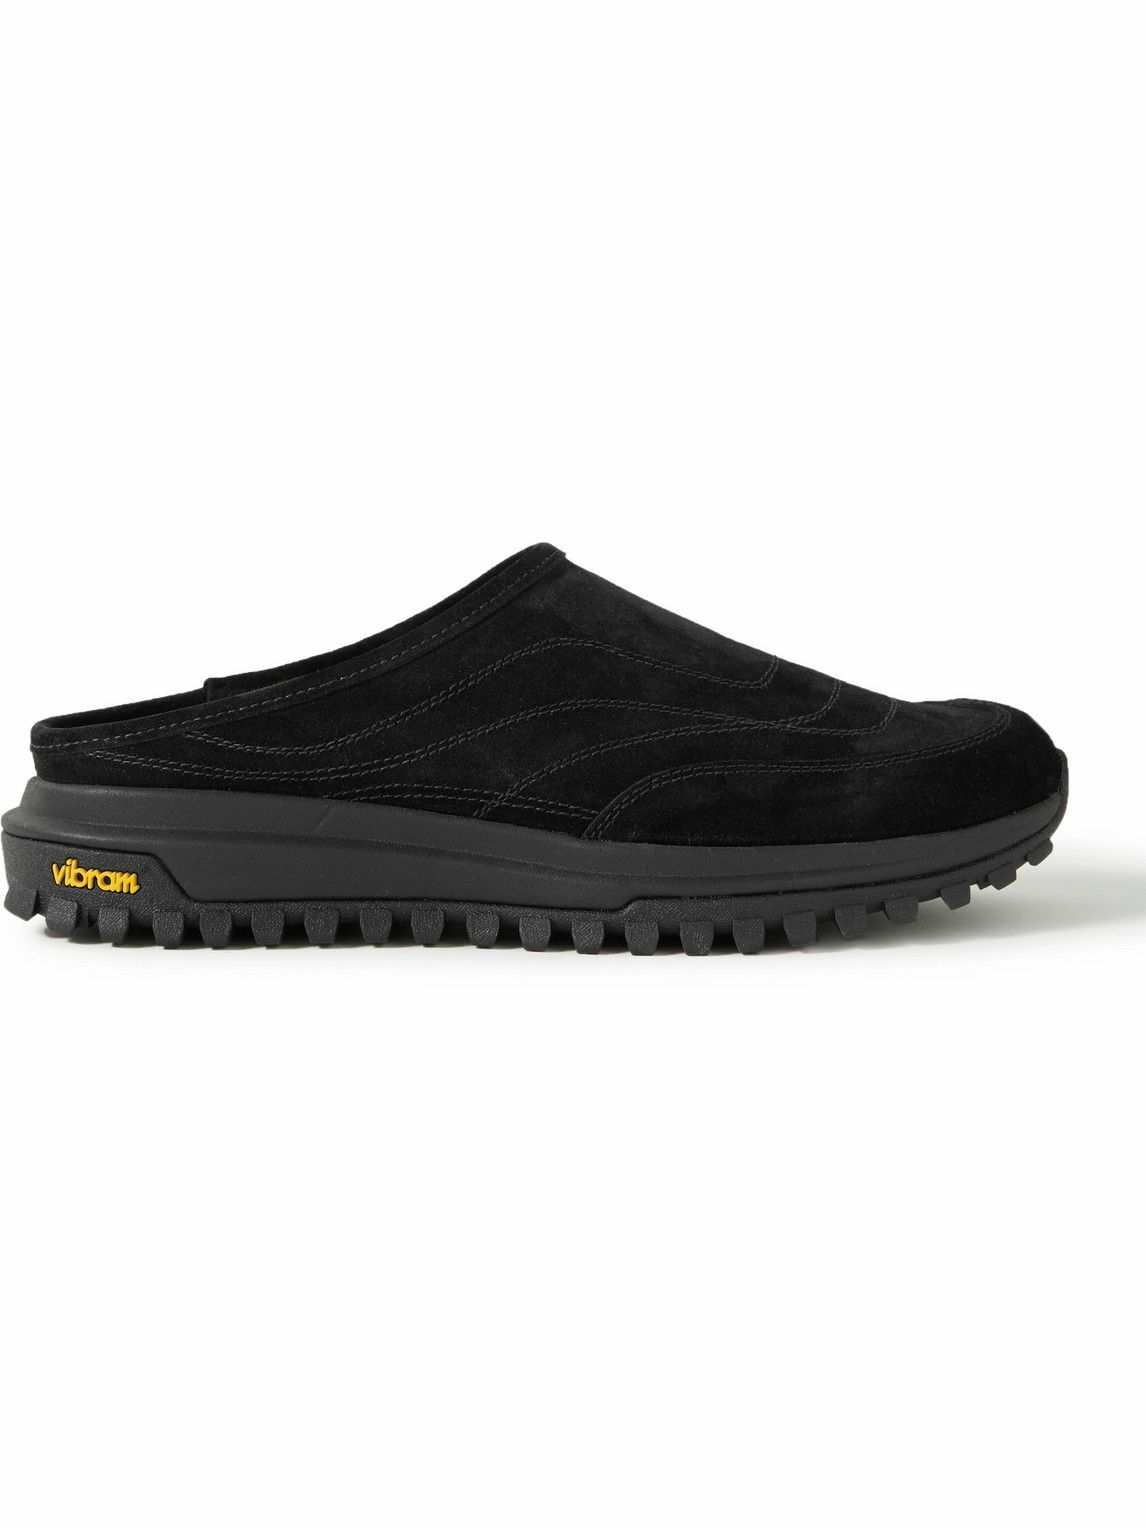 Photo: Diemme - Maggiore Embroidered Suede Slip-On Sneakers - Black